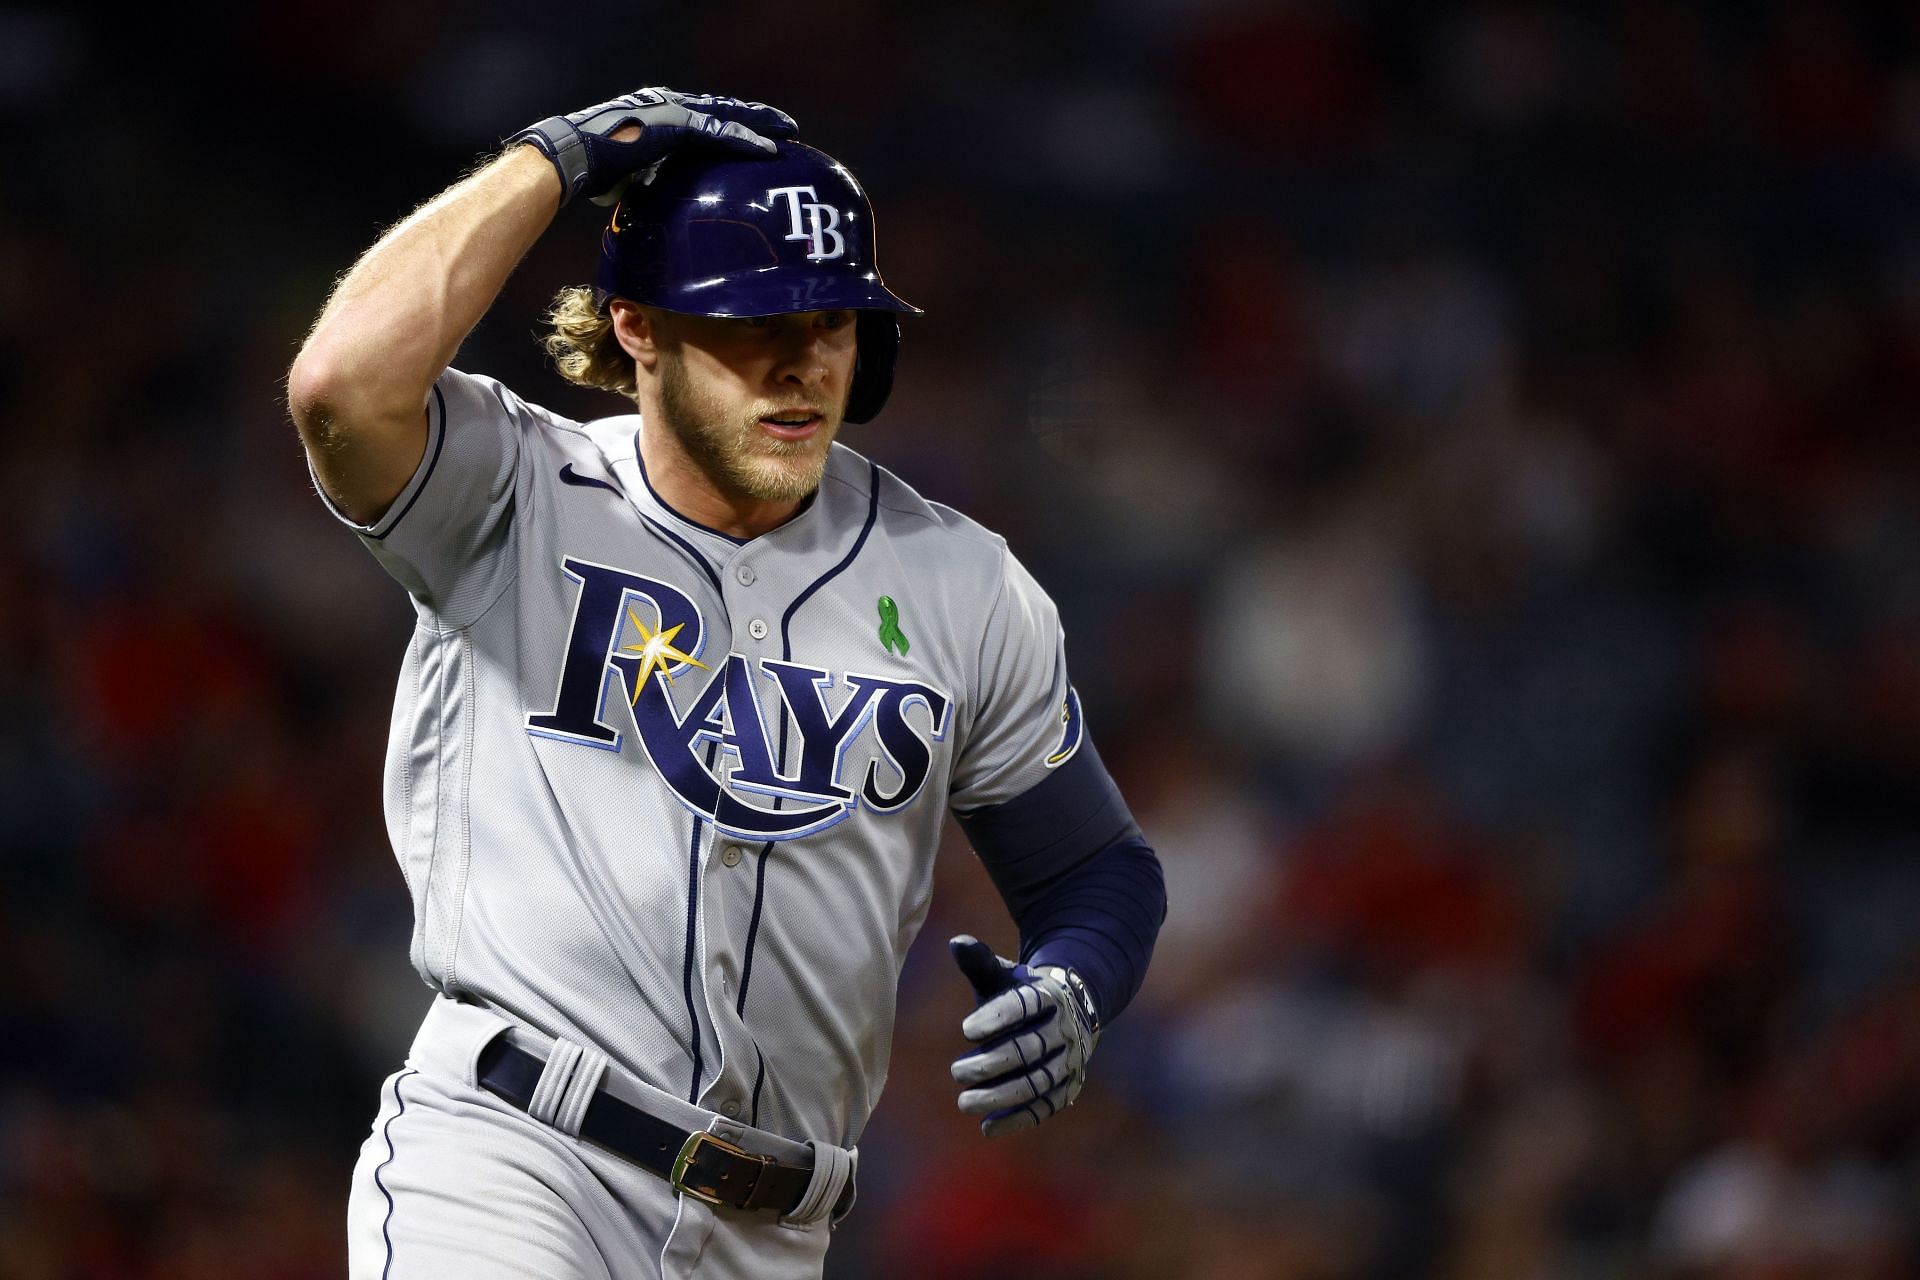 Tampa Bay Rays shortstop Taylor Walls said the New York Yankees are &quot;beatable.&quot;